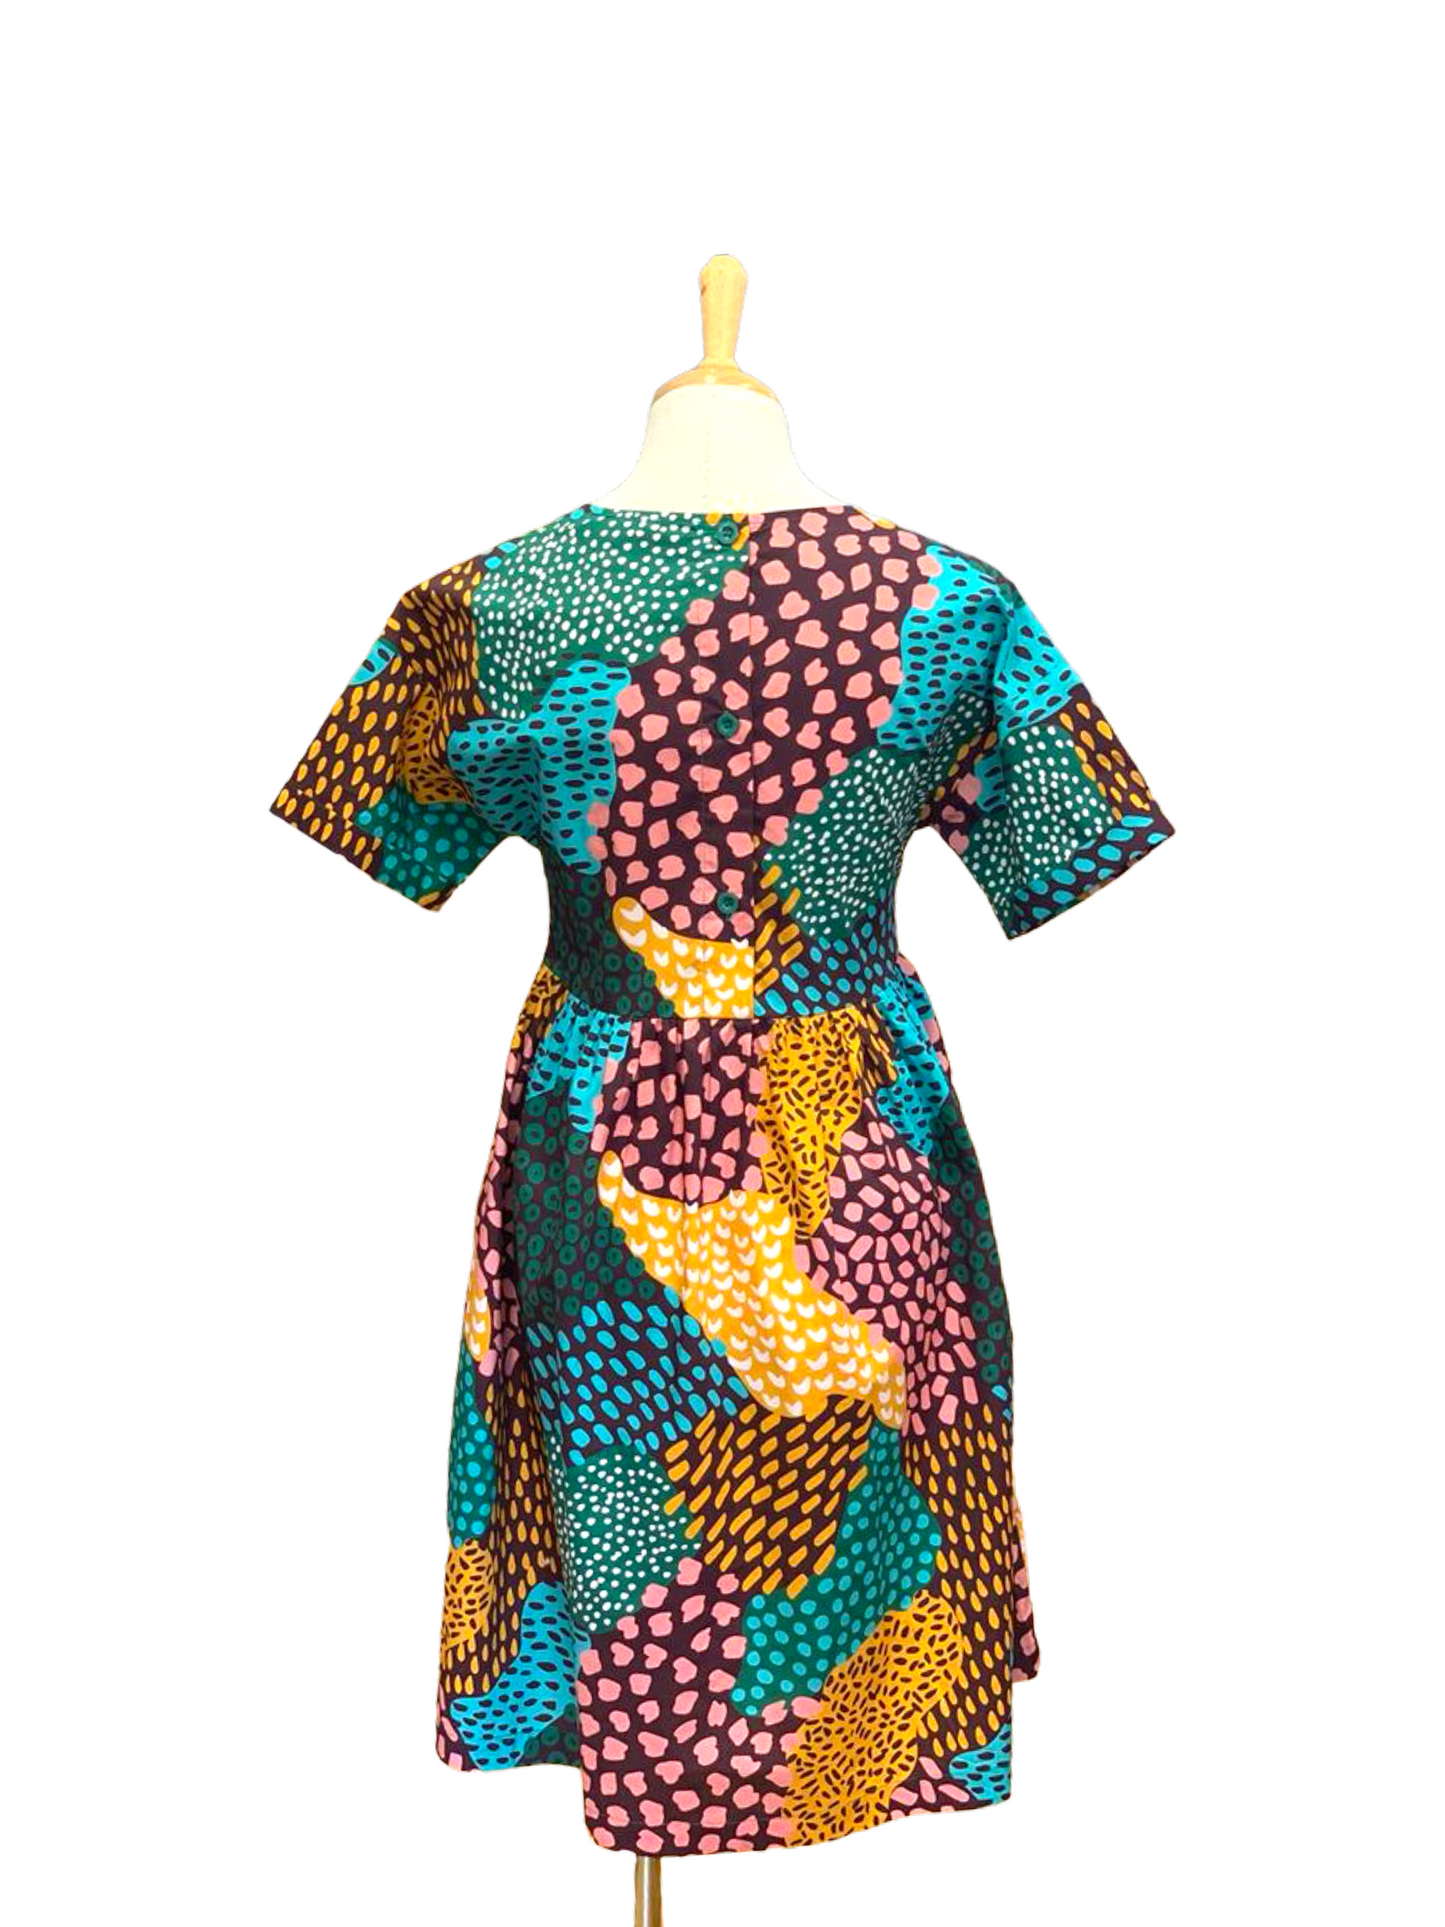 Molly Dress - Wild Abstract